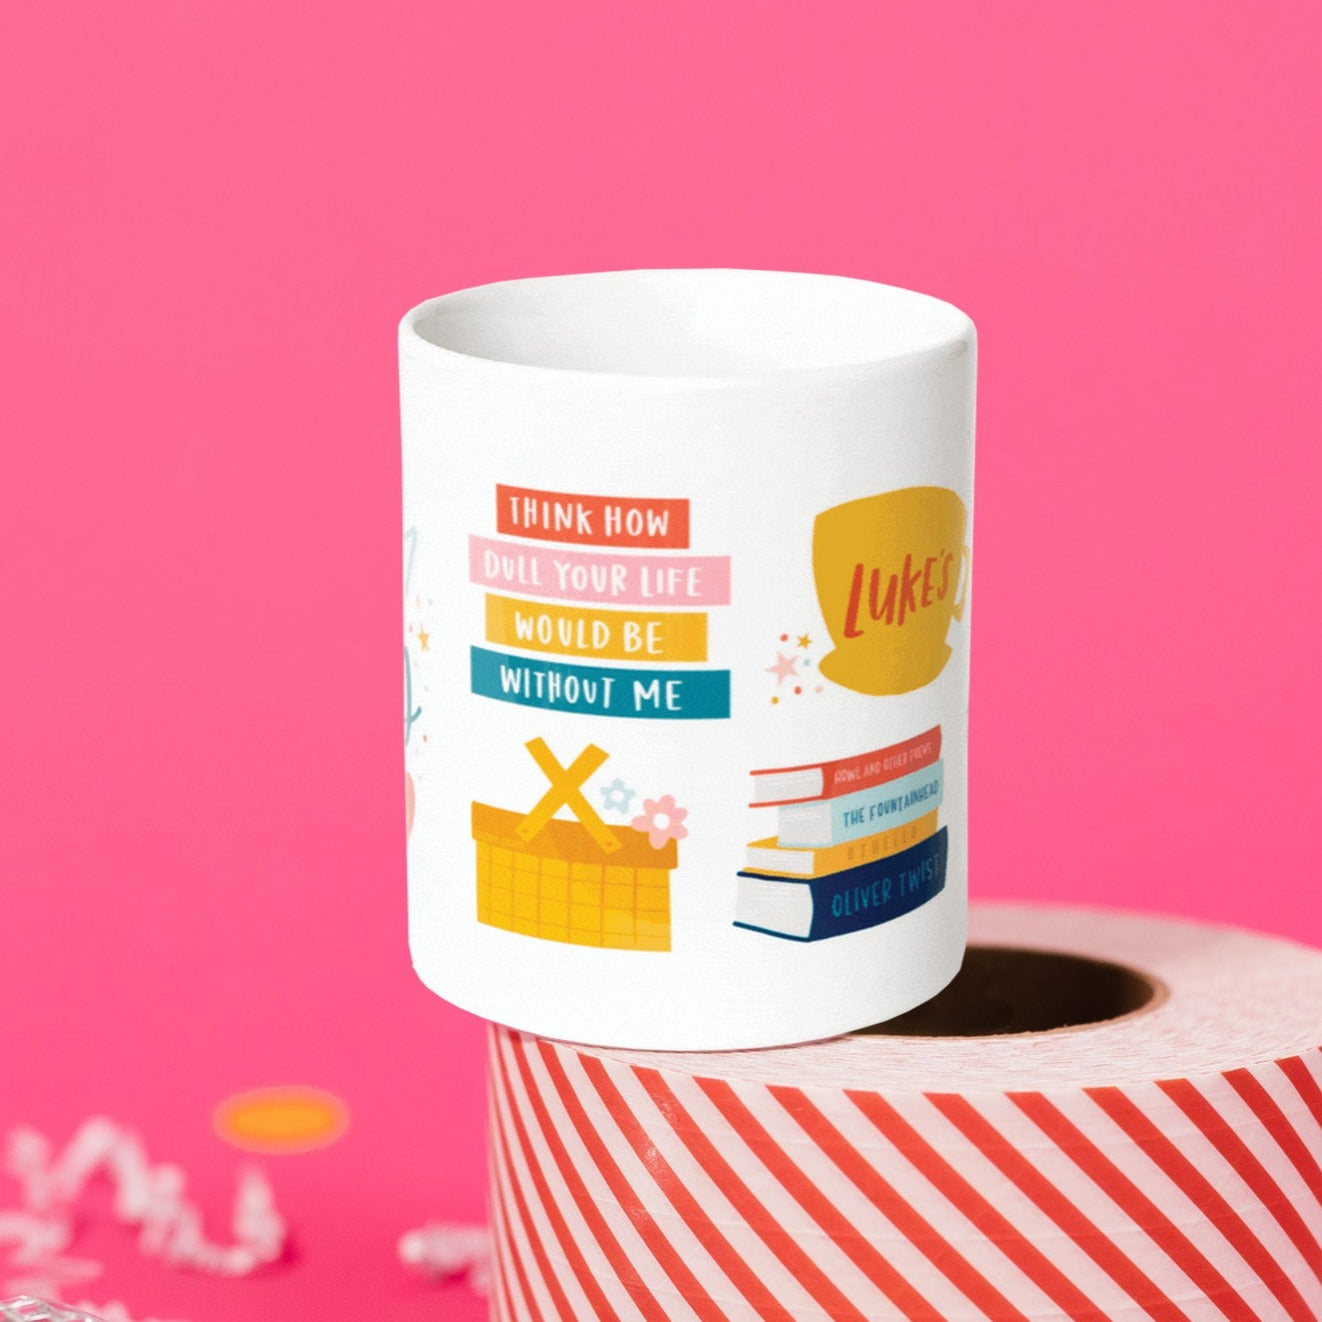 On a hot background sits a mug atop a red and white striped roll of packing tape with white crinkle and big, colorful confetti scattered around. There are mini disco balls. This Gilmore Girls inspired white mug has colorful illustrations. It has a coffee mug that says "Luke's" and there are books stacked, a picnic basket with flowers, and colorful rectangles. It says "THINK HOW”, "DULL YOUR LIFE”, "WOULD BE" and "WITHOUT ME." They are written in white, handwritten lettering.